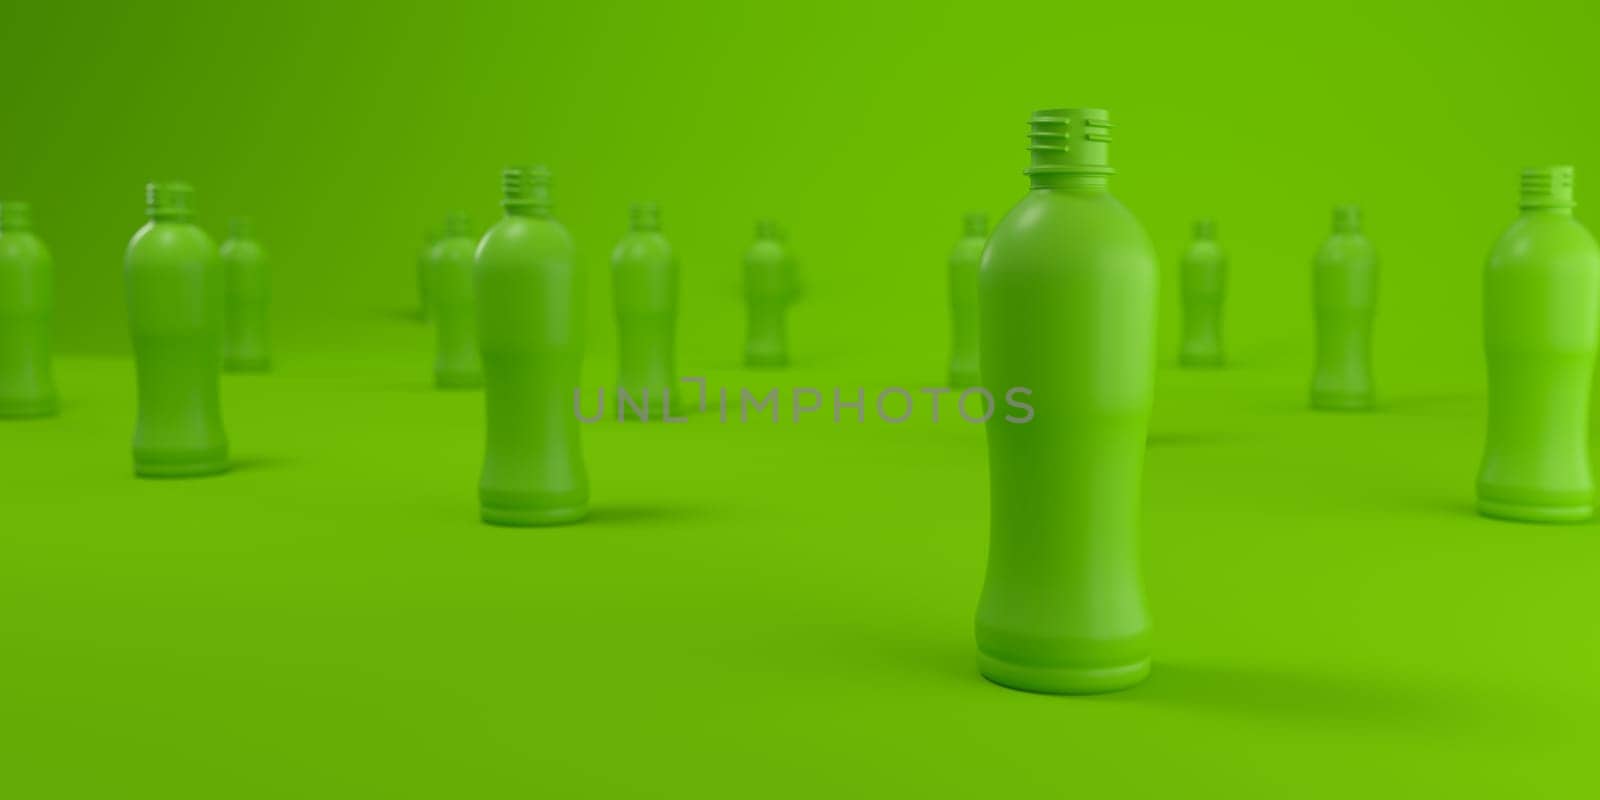 Formation of several plastic bottles on a green studio background. concept of plastic recycling and reuse on the planet. 3D rendering